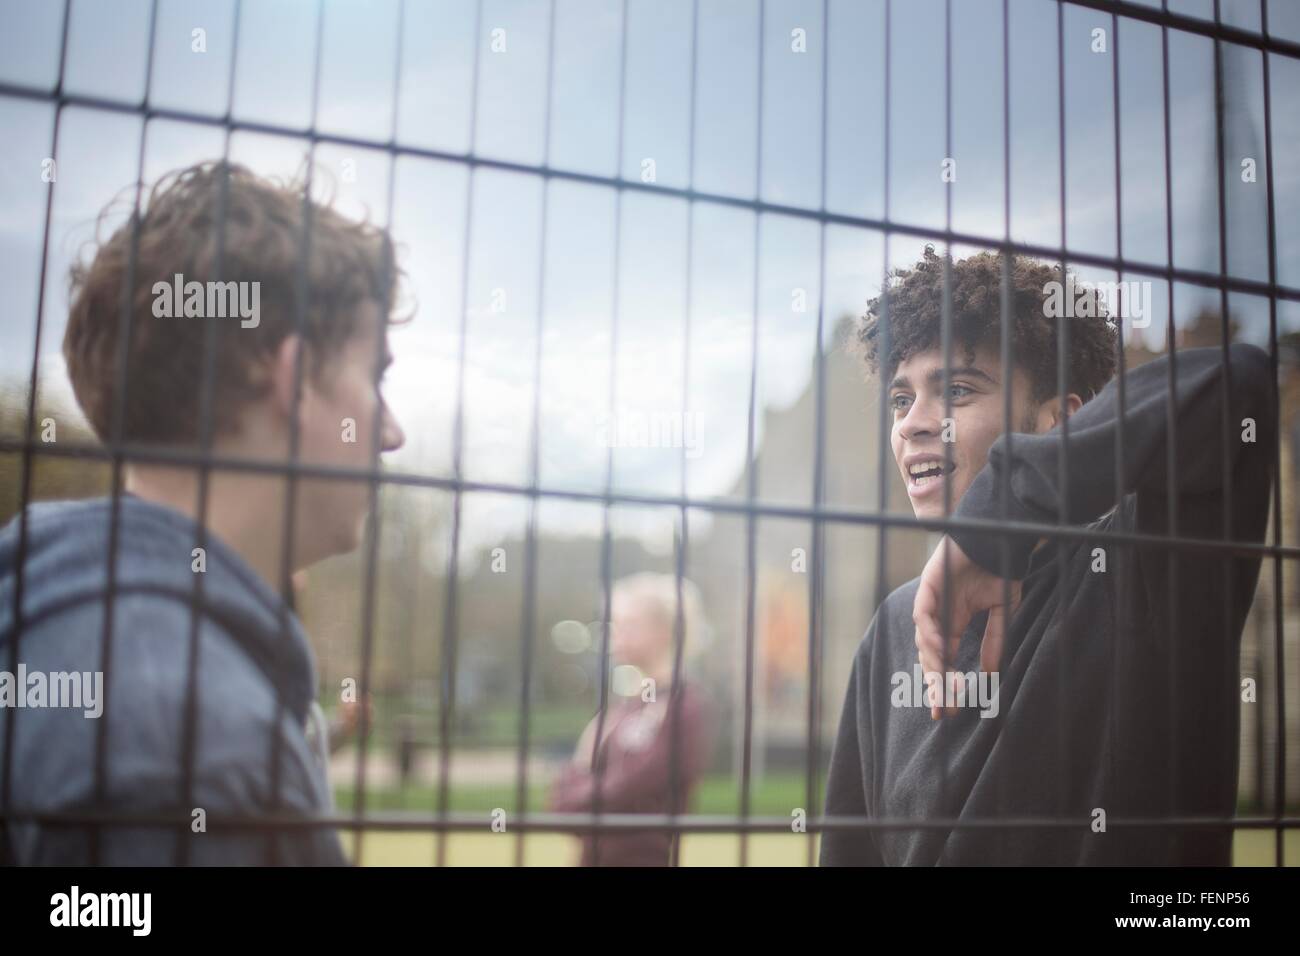 Two young men leaning against fence, talking Stock Photo